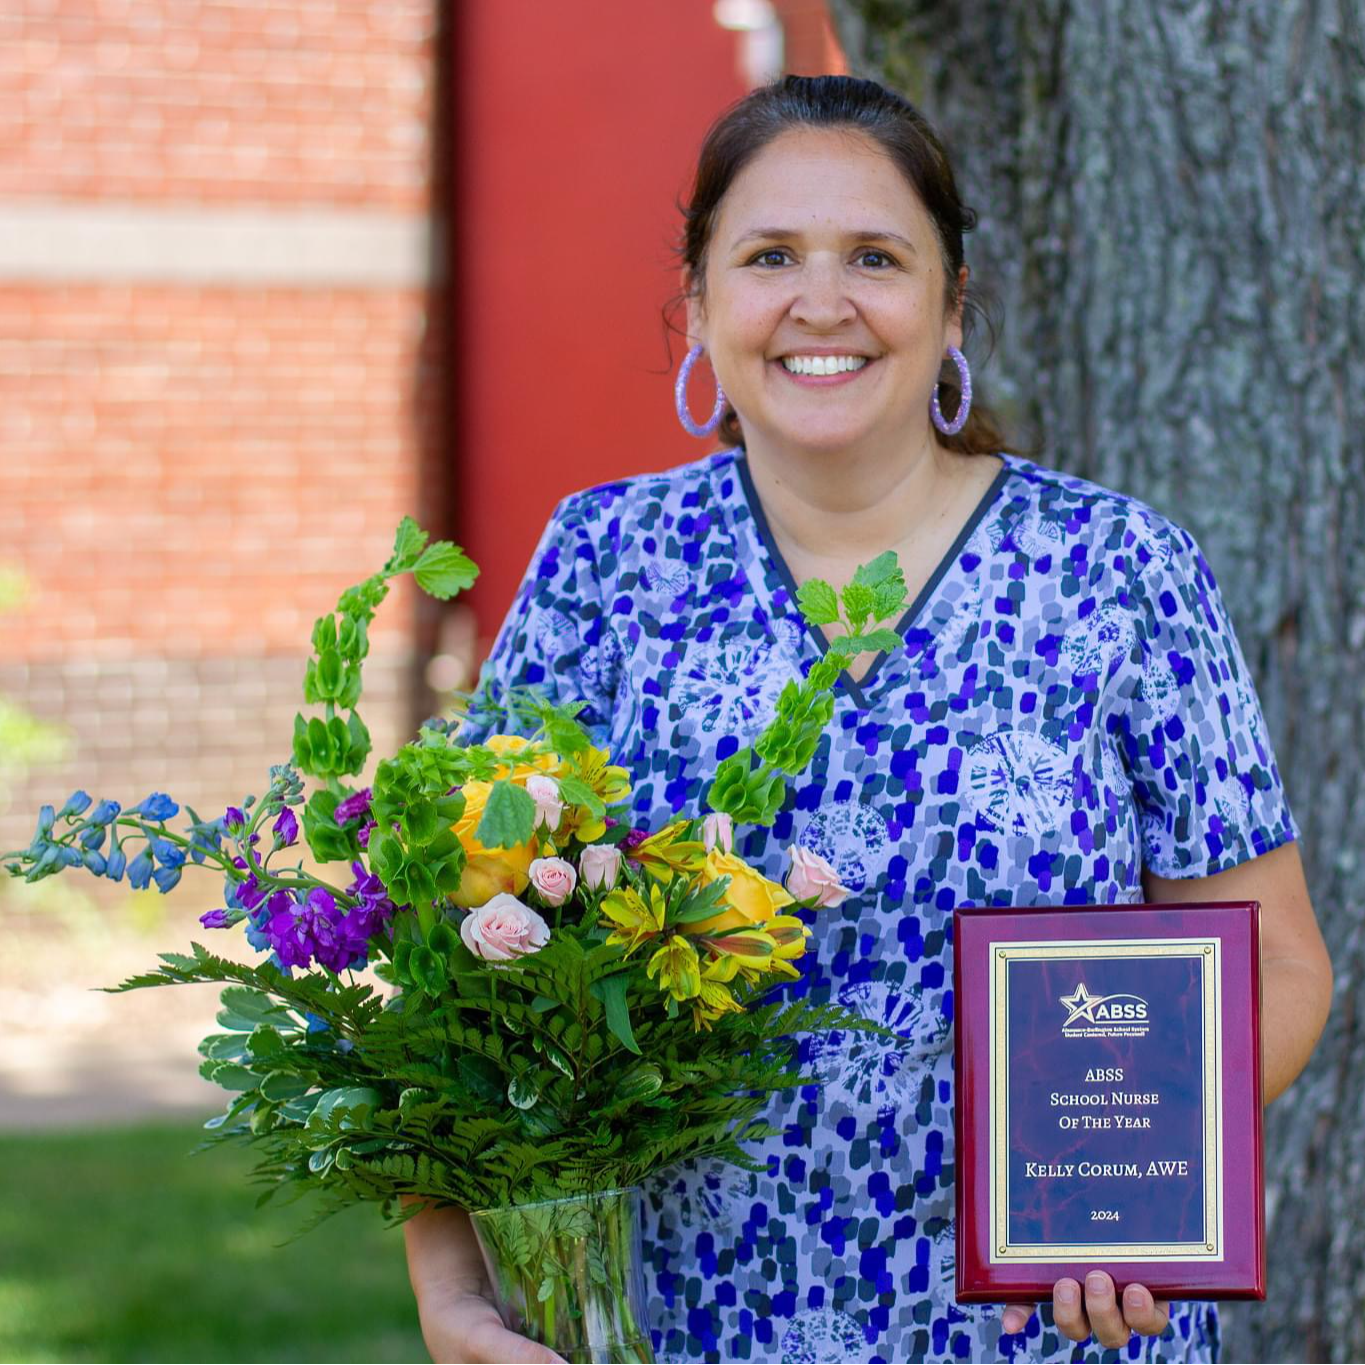 Kelly Corum, School Nurse of the Year, standing outside with flowers